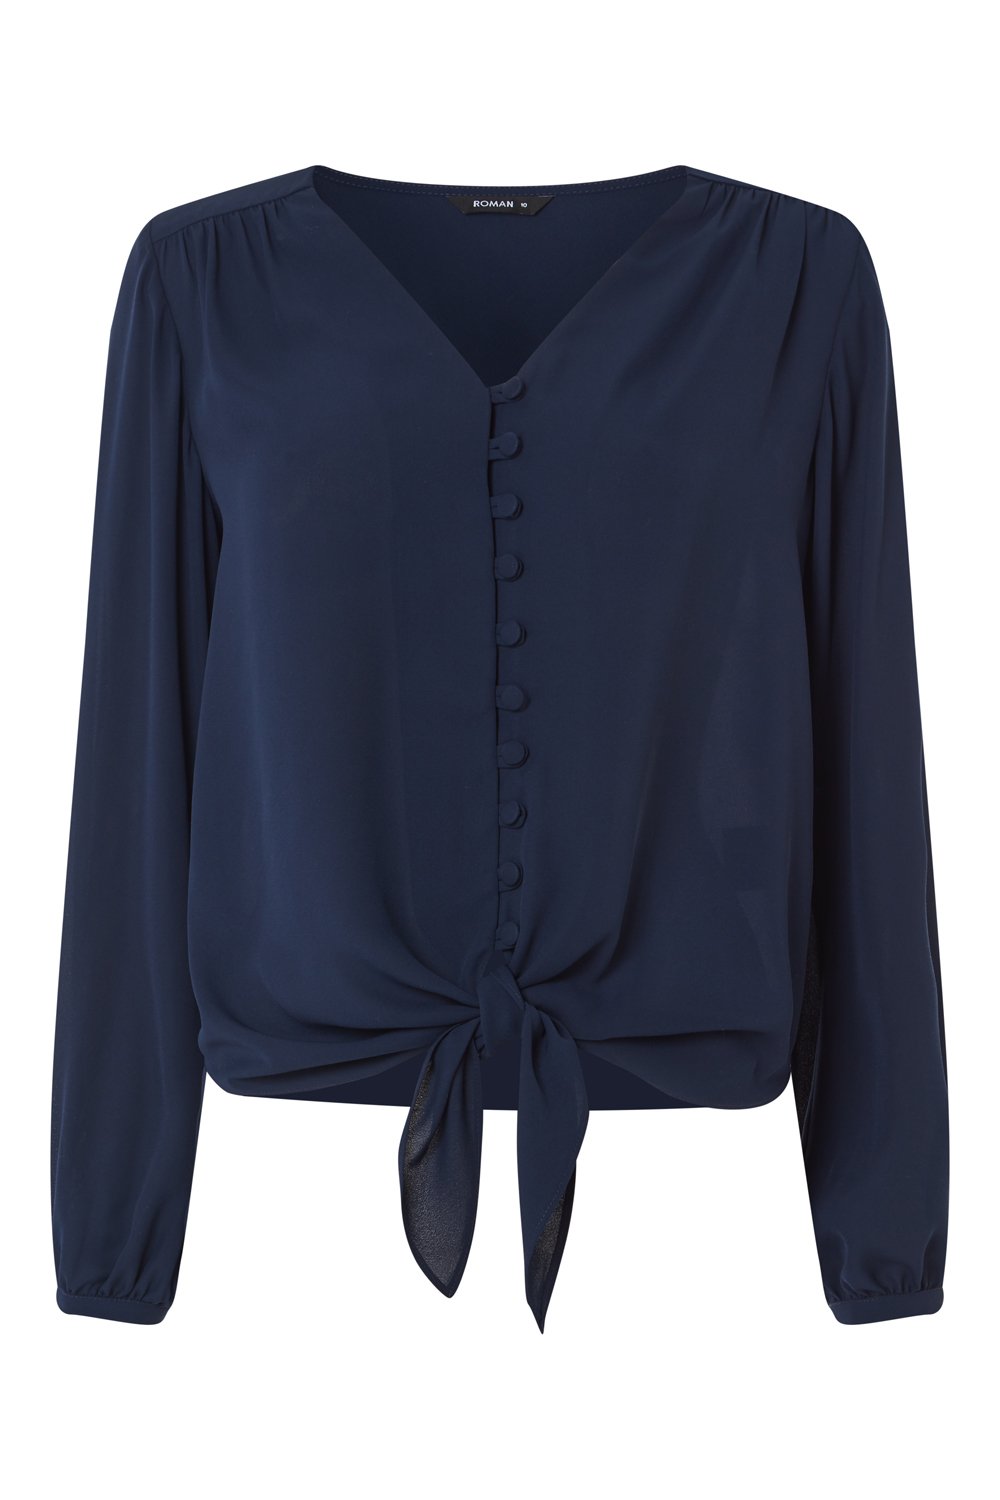 Navy Blue  Button Tie Front Blouse, Image 4 of 8